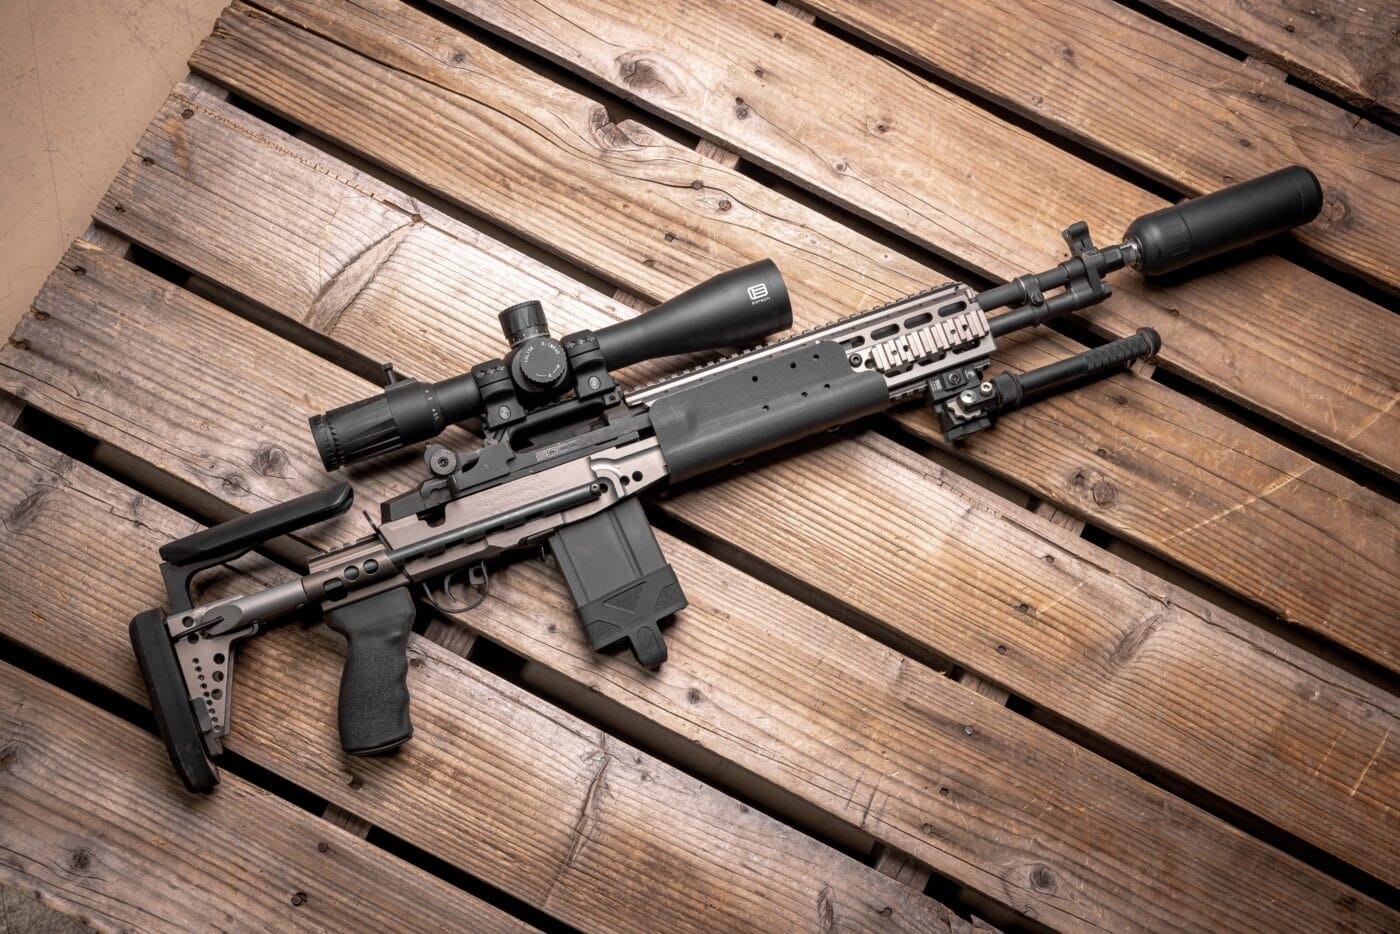 X2 Dev Group Orion-X suppressor  mounted on rifle